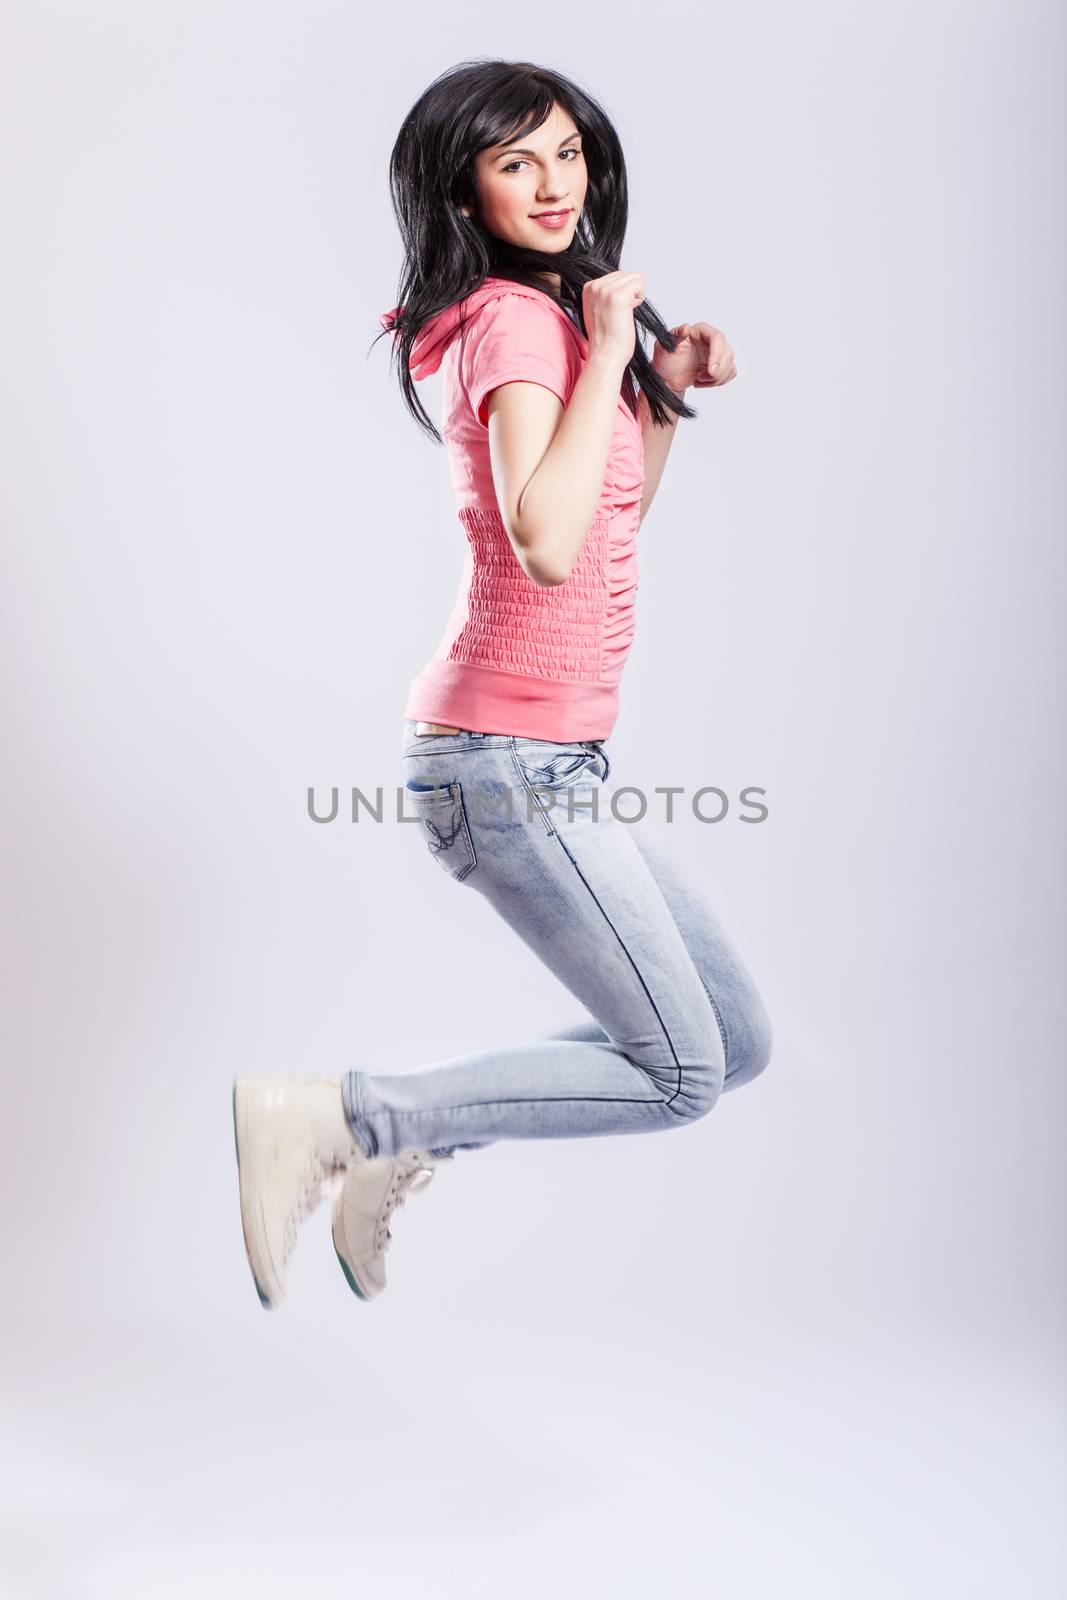 attractive young girl jumping, wearing pink hoodie and jeans